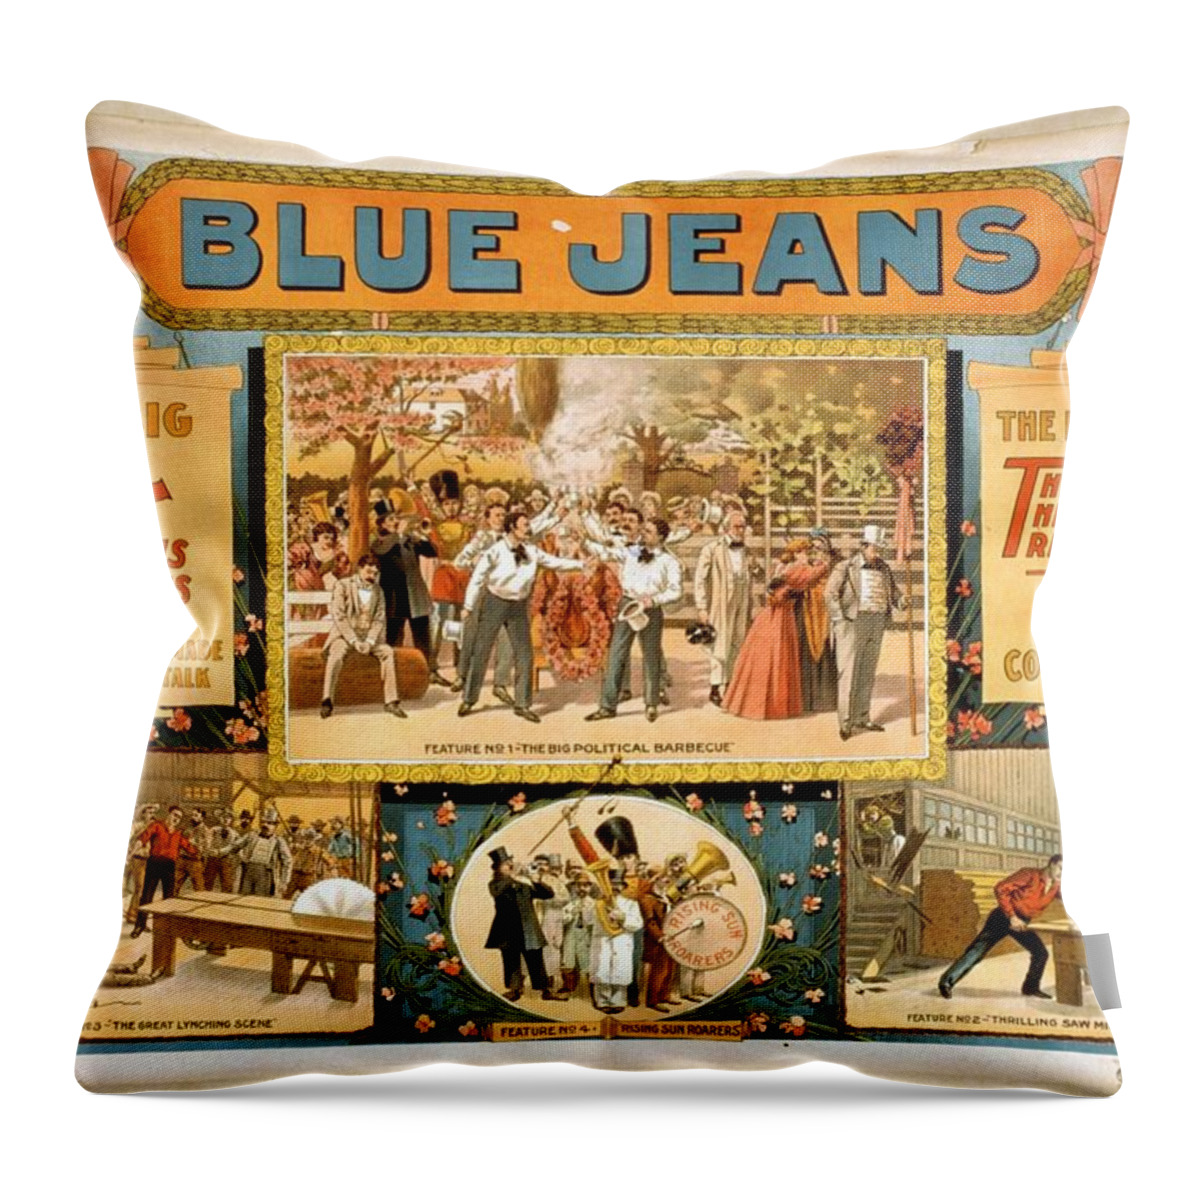 Vintage Poster Throw Pillow featuring the digital art Blue Jeans - Will Never Wear Out - Vintage Advertising Poster - Joseph Arthur by Studio Grafiikka